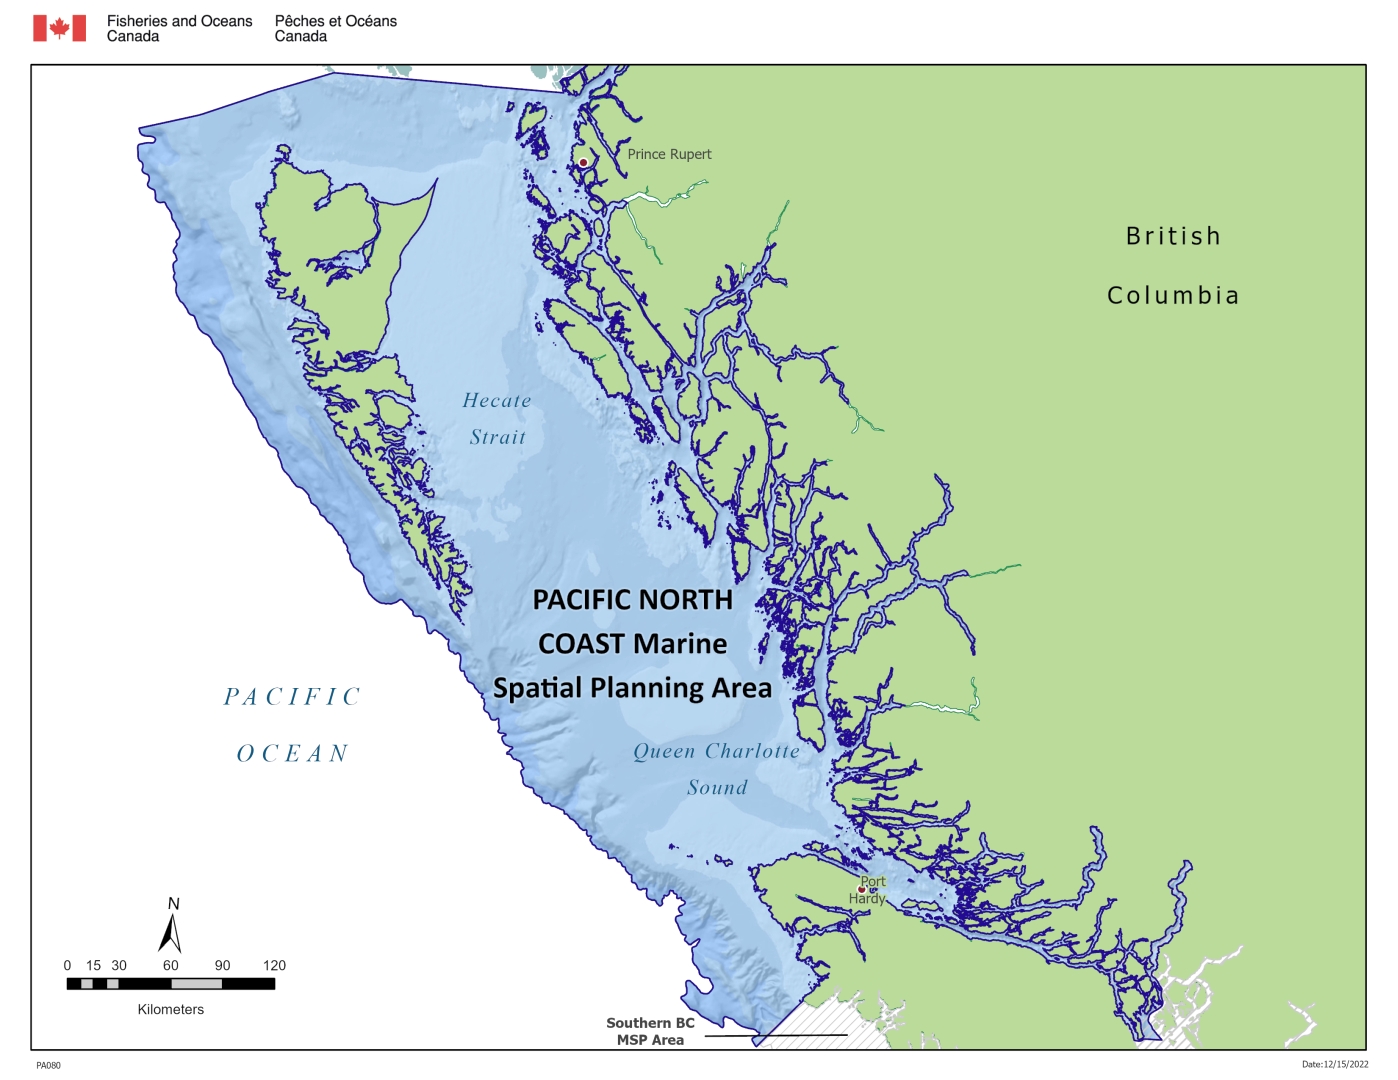 The Pacific North Coast planning area encompasses the Northern Shelf Bioregion. This approximately 101,000 km² area extends from the coastal watershed in the east to the base of the continental shelf slope in the west and from the Canada-U.S. border of Alaska in the north to northwest Vancouver Island (Brooks Peninsula) and Quadra Island in the south.